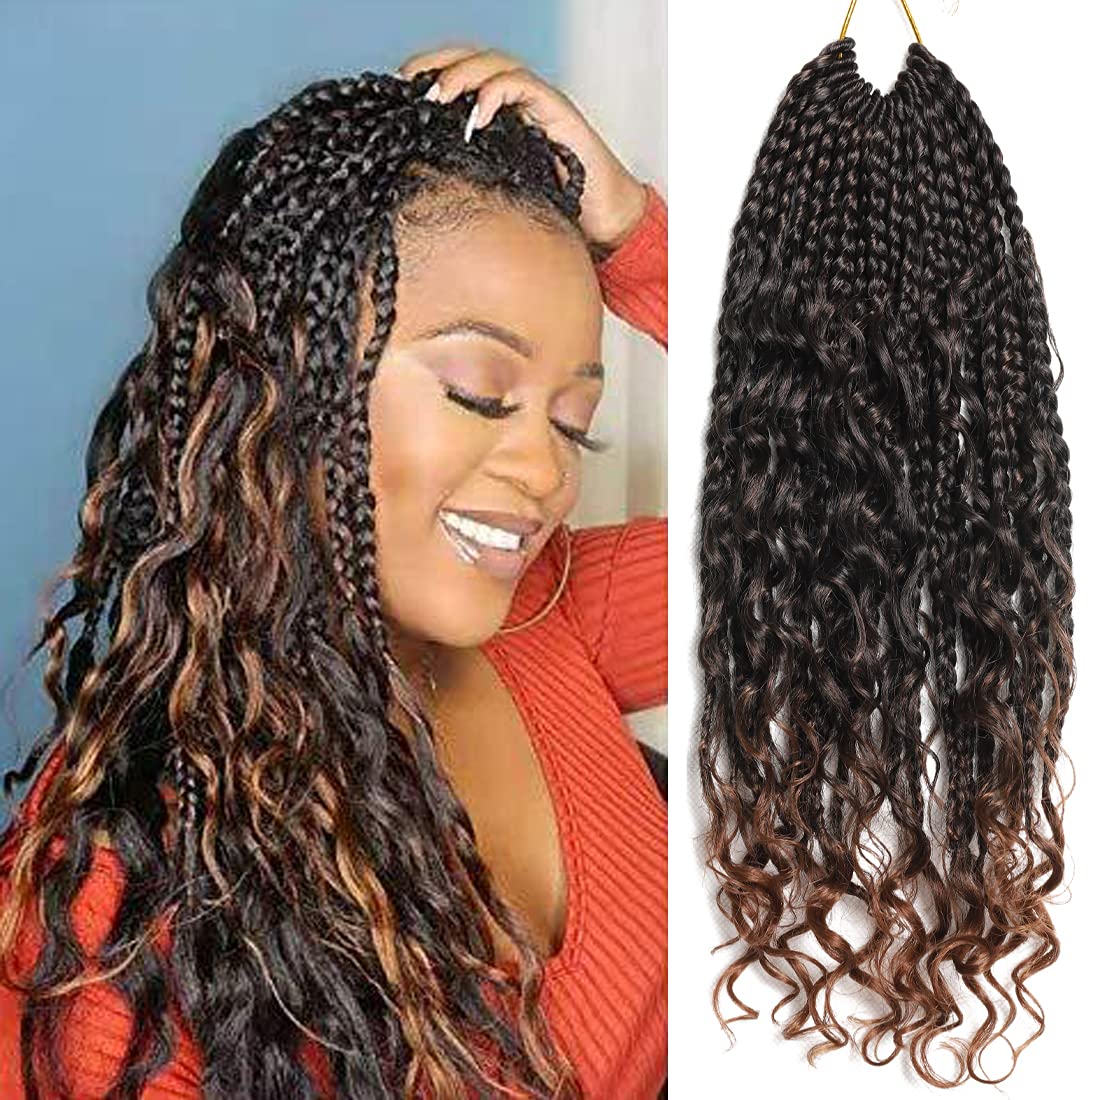  10 Inch Bob Box Braid Crochet Hair with Curly Ends 6 Packs  Synthetic Hair Crochet Braid Hair for Black Women (2#, 10 Inch) : Beauty &  Personal Care